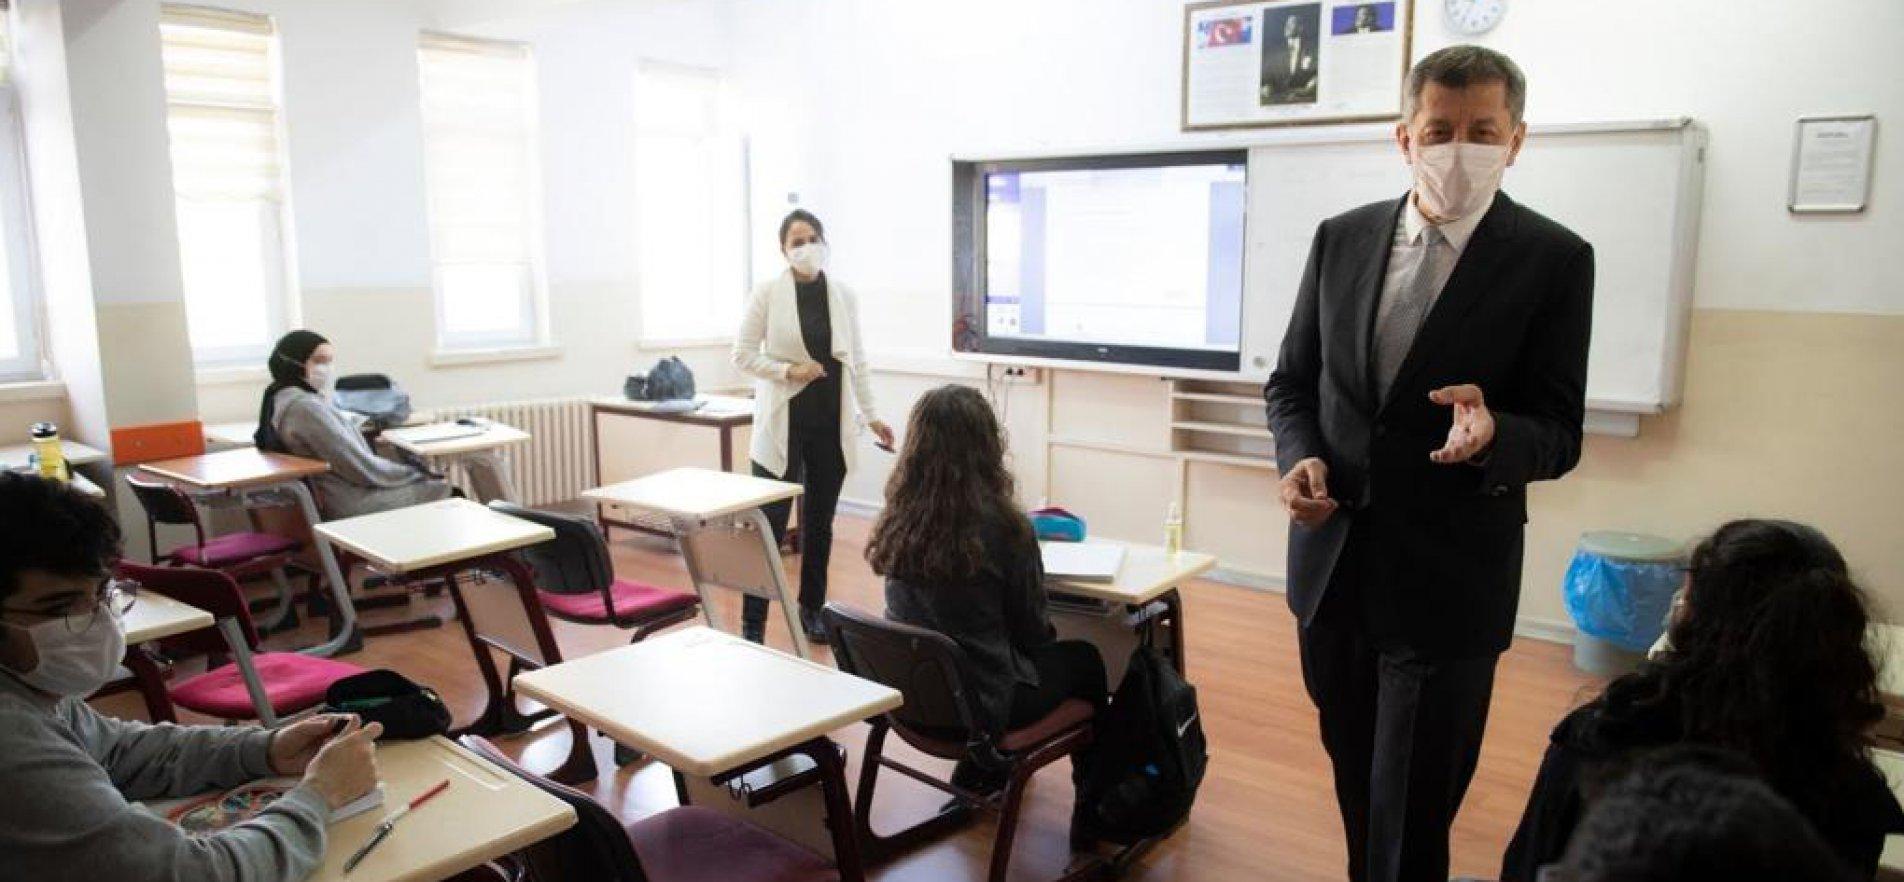 MINISTER SELÇUK COMMENTS ABOUT DEVELOPMENTS IN THE EDUCATION AGENDA IN A LIVE BROADCAST